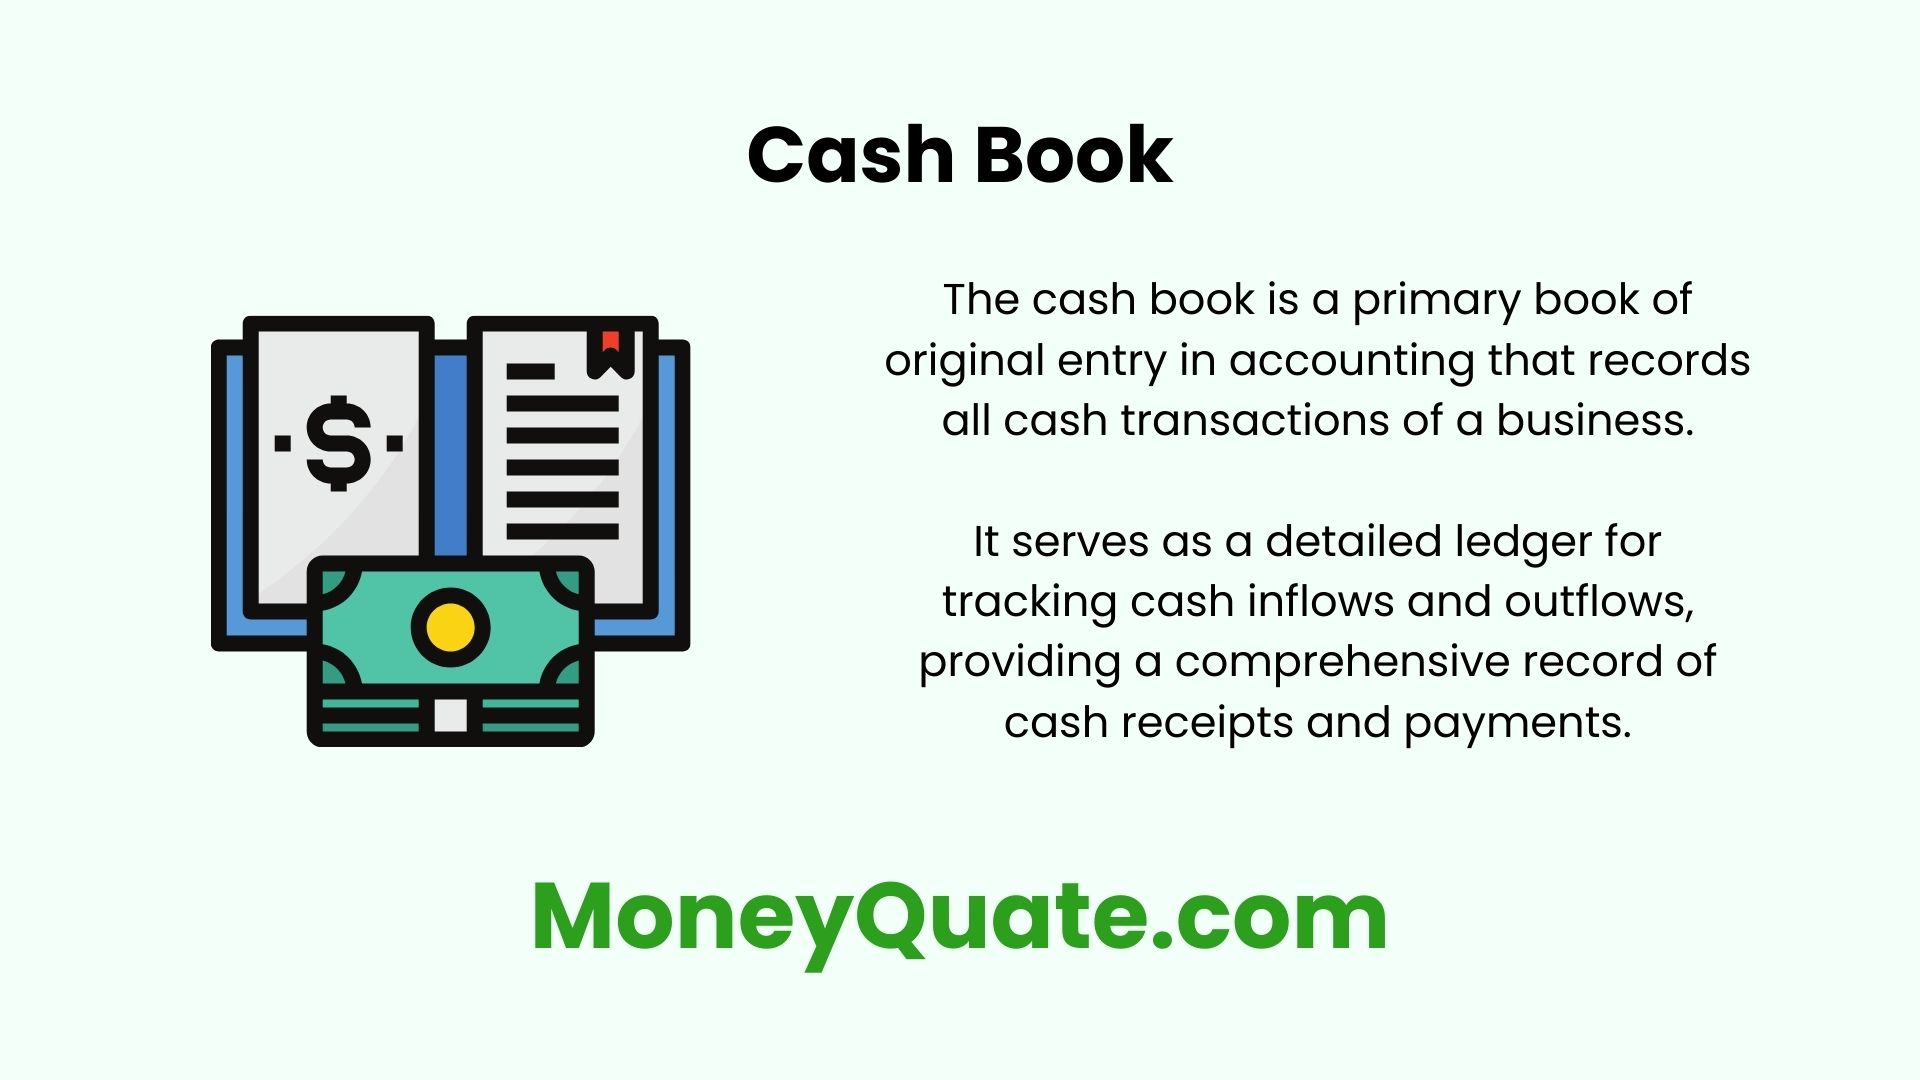 The Cash Book Explained